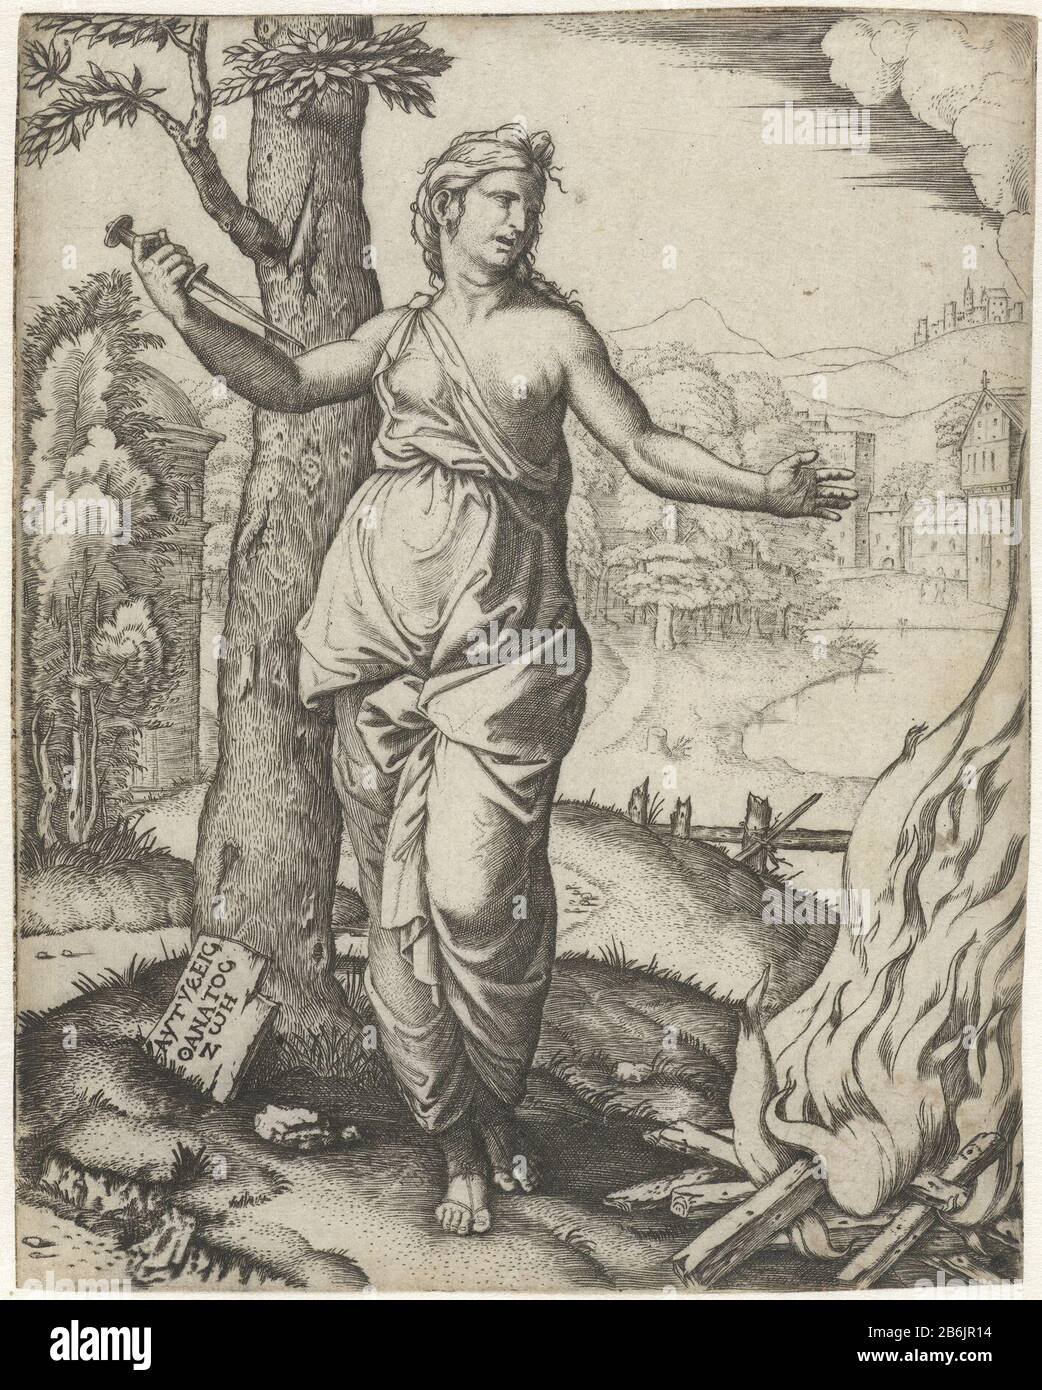 Dido kills himself with dagger next stake Dido kills herself with dagger beside stake object type: picture Item number: RP-P-OB-11.903Catalogusreferentie: Bartsch 187-2 (2) Markings / Brands: collector's mark, verso lower left, stamped: Lugt 240 Manufacturer : printmaker: Marcantonio Raimondinaar design: Rafael (possible) Place manufacture: Italy Date: 1508 - 1512 Physical characteristics: engra material: paper Technique: engra (printing process) Measurements: sheet: h 159 mm × W 126 mmToelichtingDe figure of the saint appears stylistically on the frescos in the Stanza della Segnatura by Rapha Stock Photo